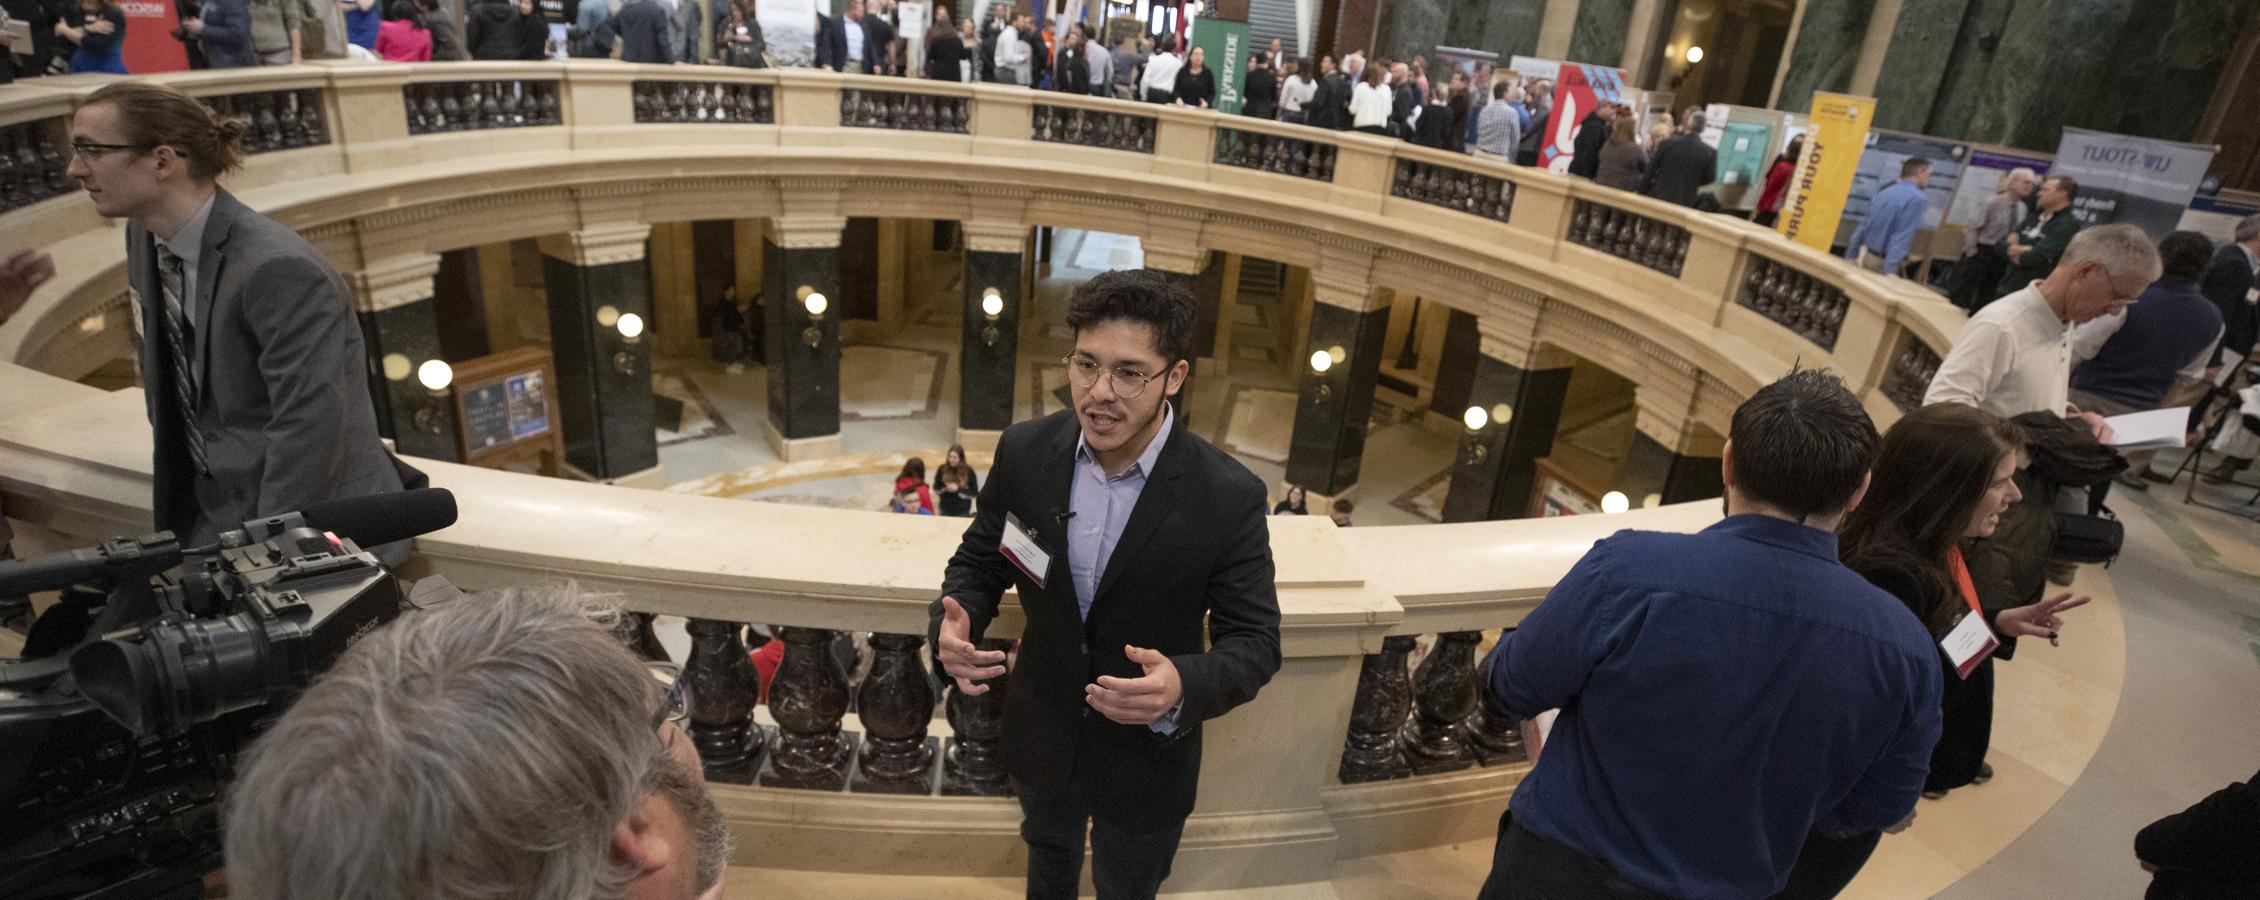 A student does an interview at the Capitol building.